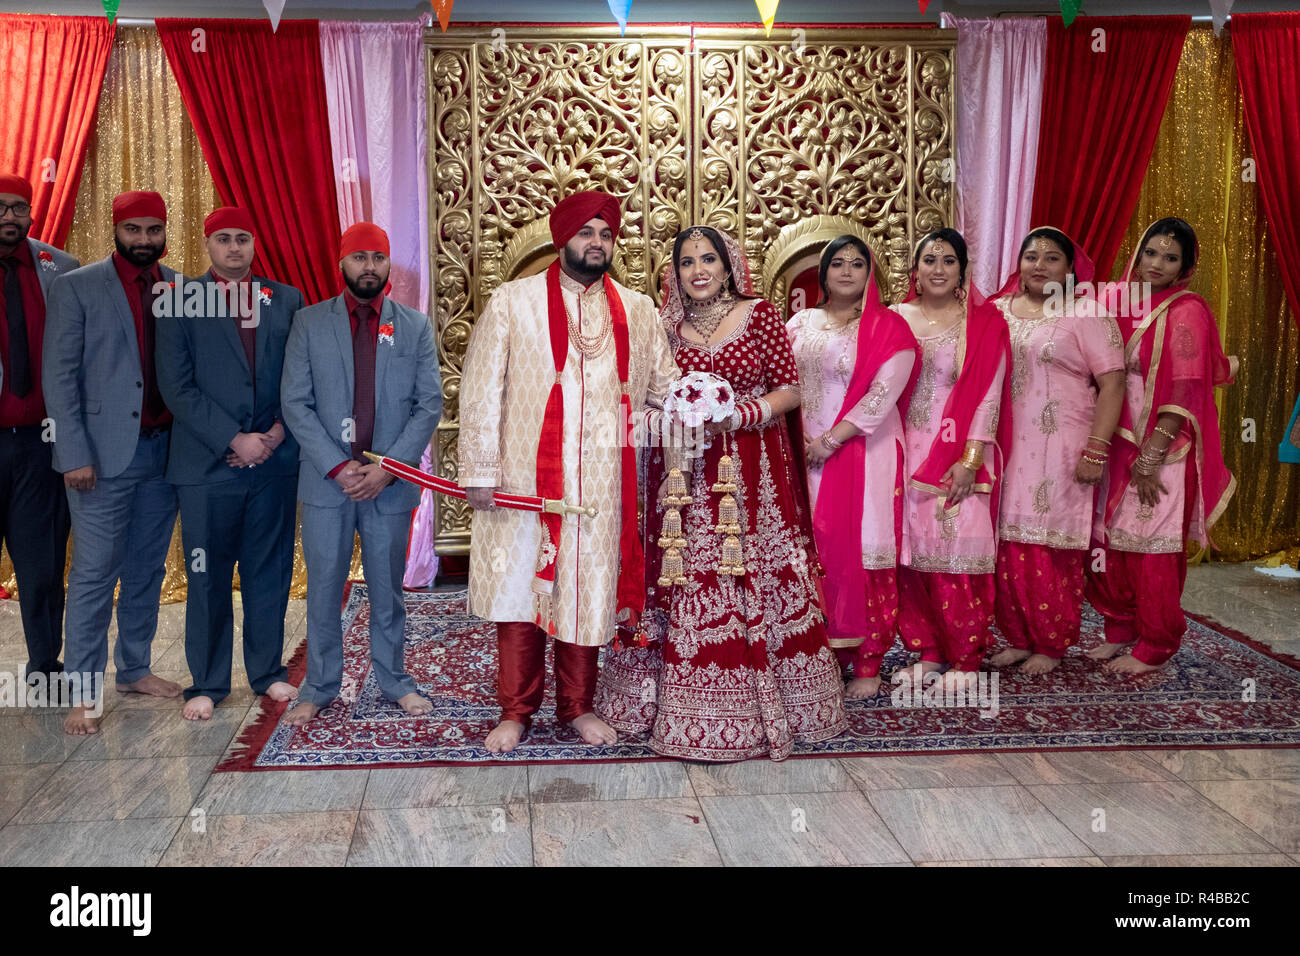 Just after their wedding, a Sikh couple poses with their bridal party at a temple in Queens, New York City. Stock Photo